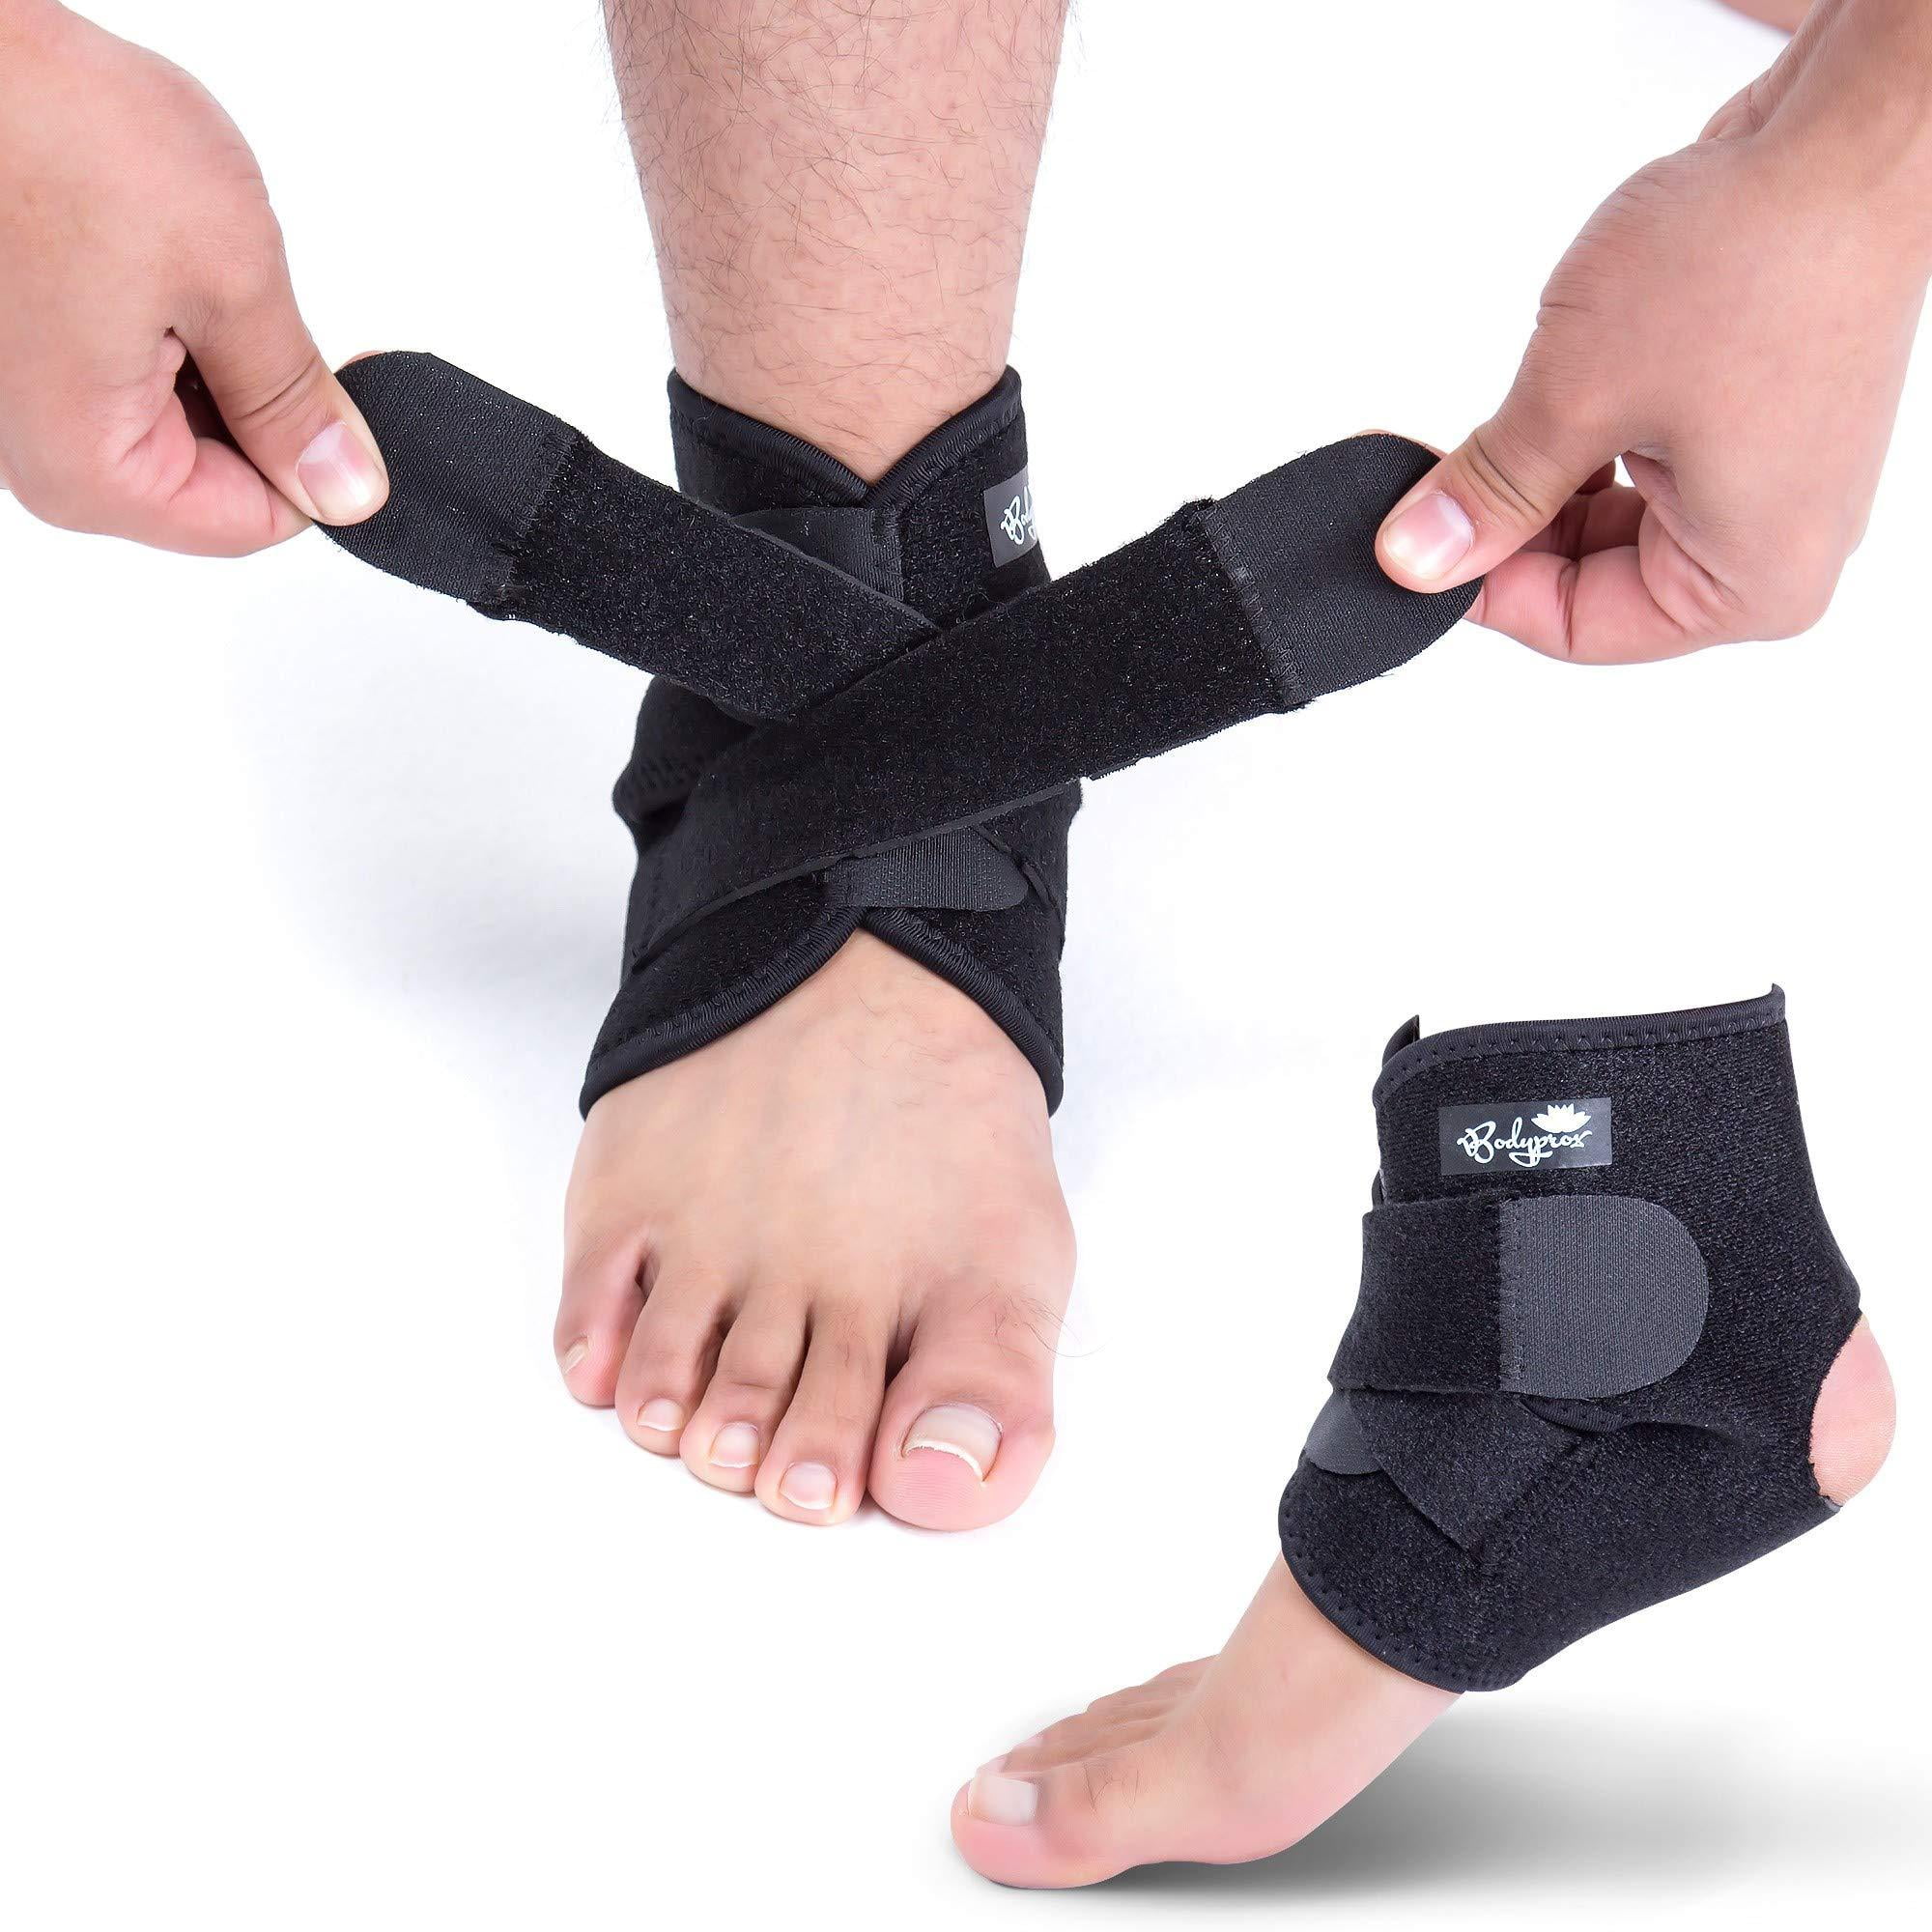 Ankle support orthosis